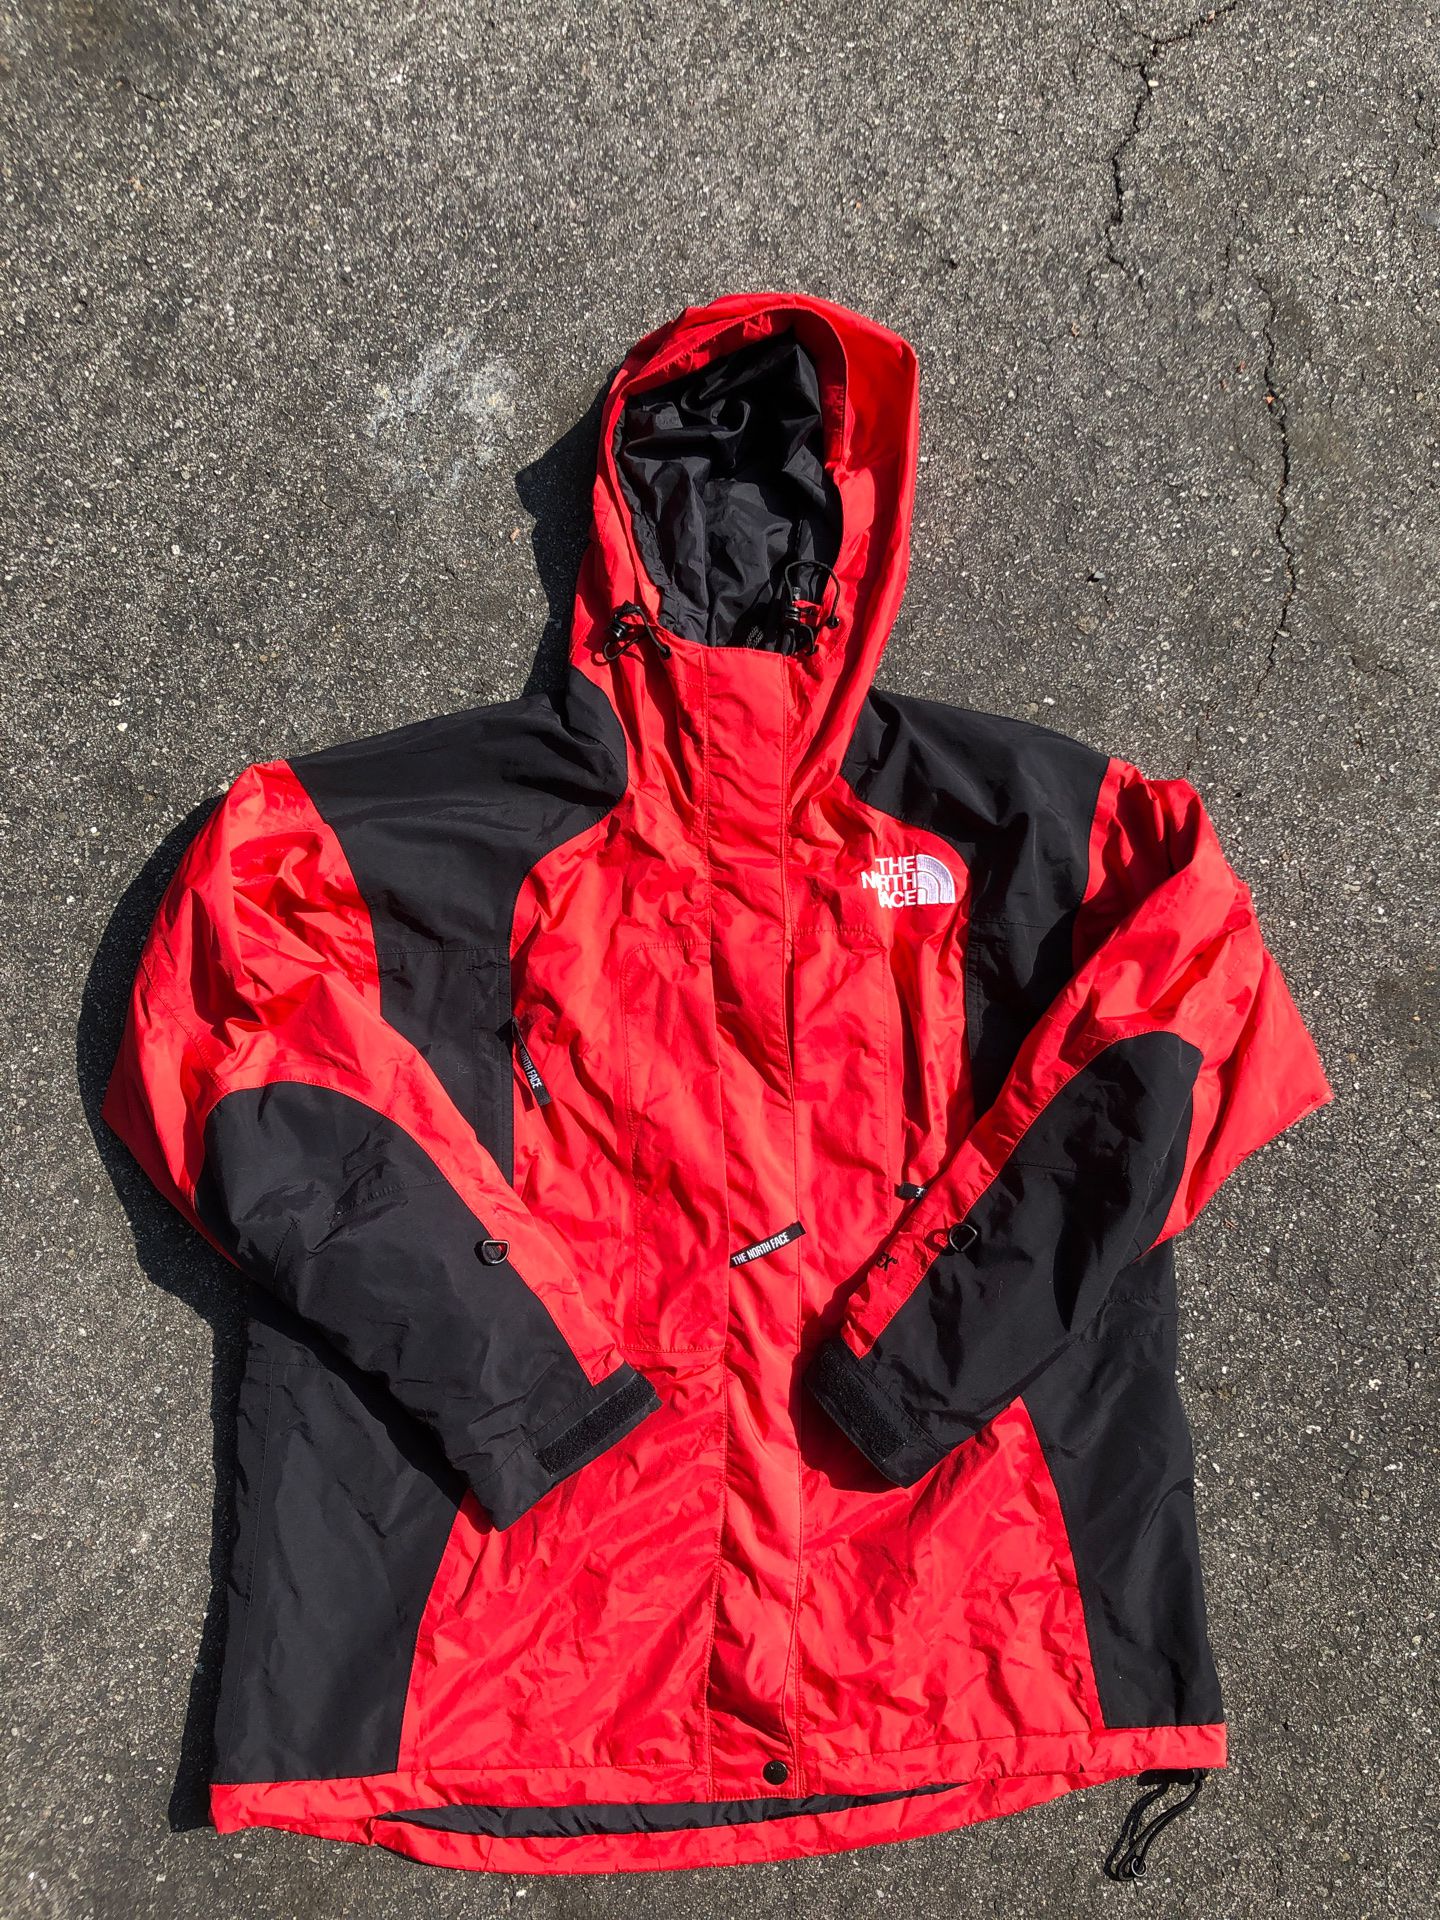 The north face gore-tex jacket size large